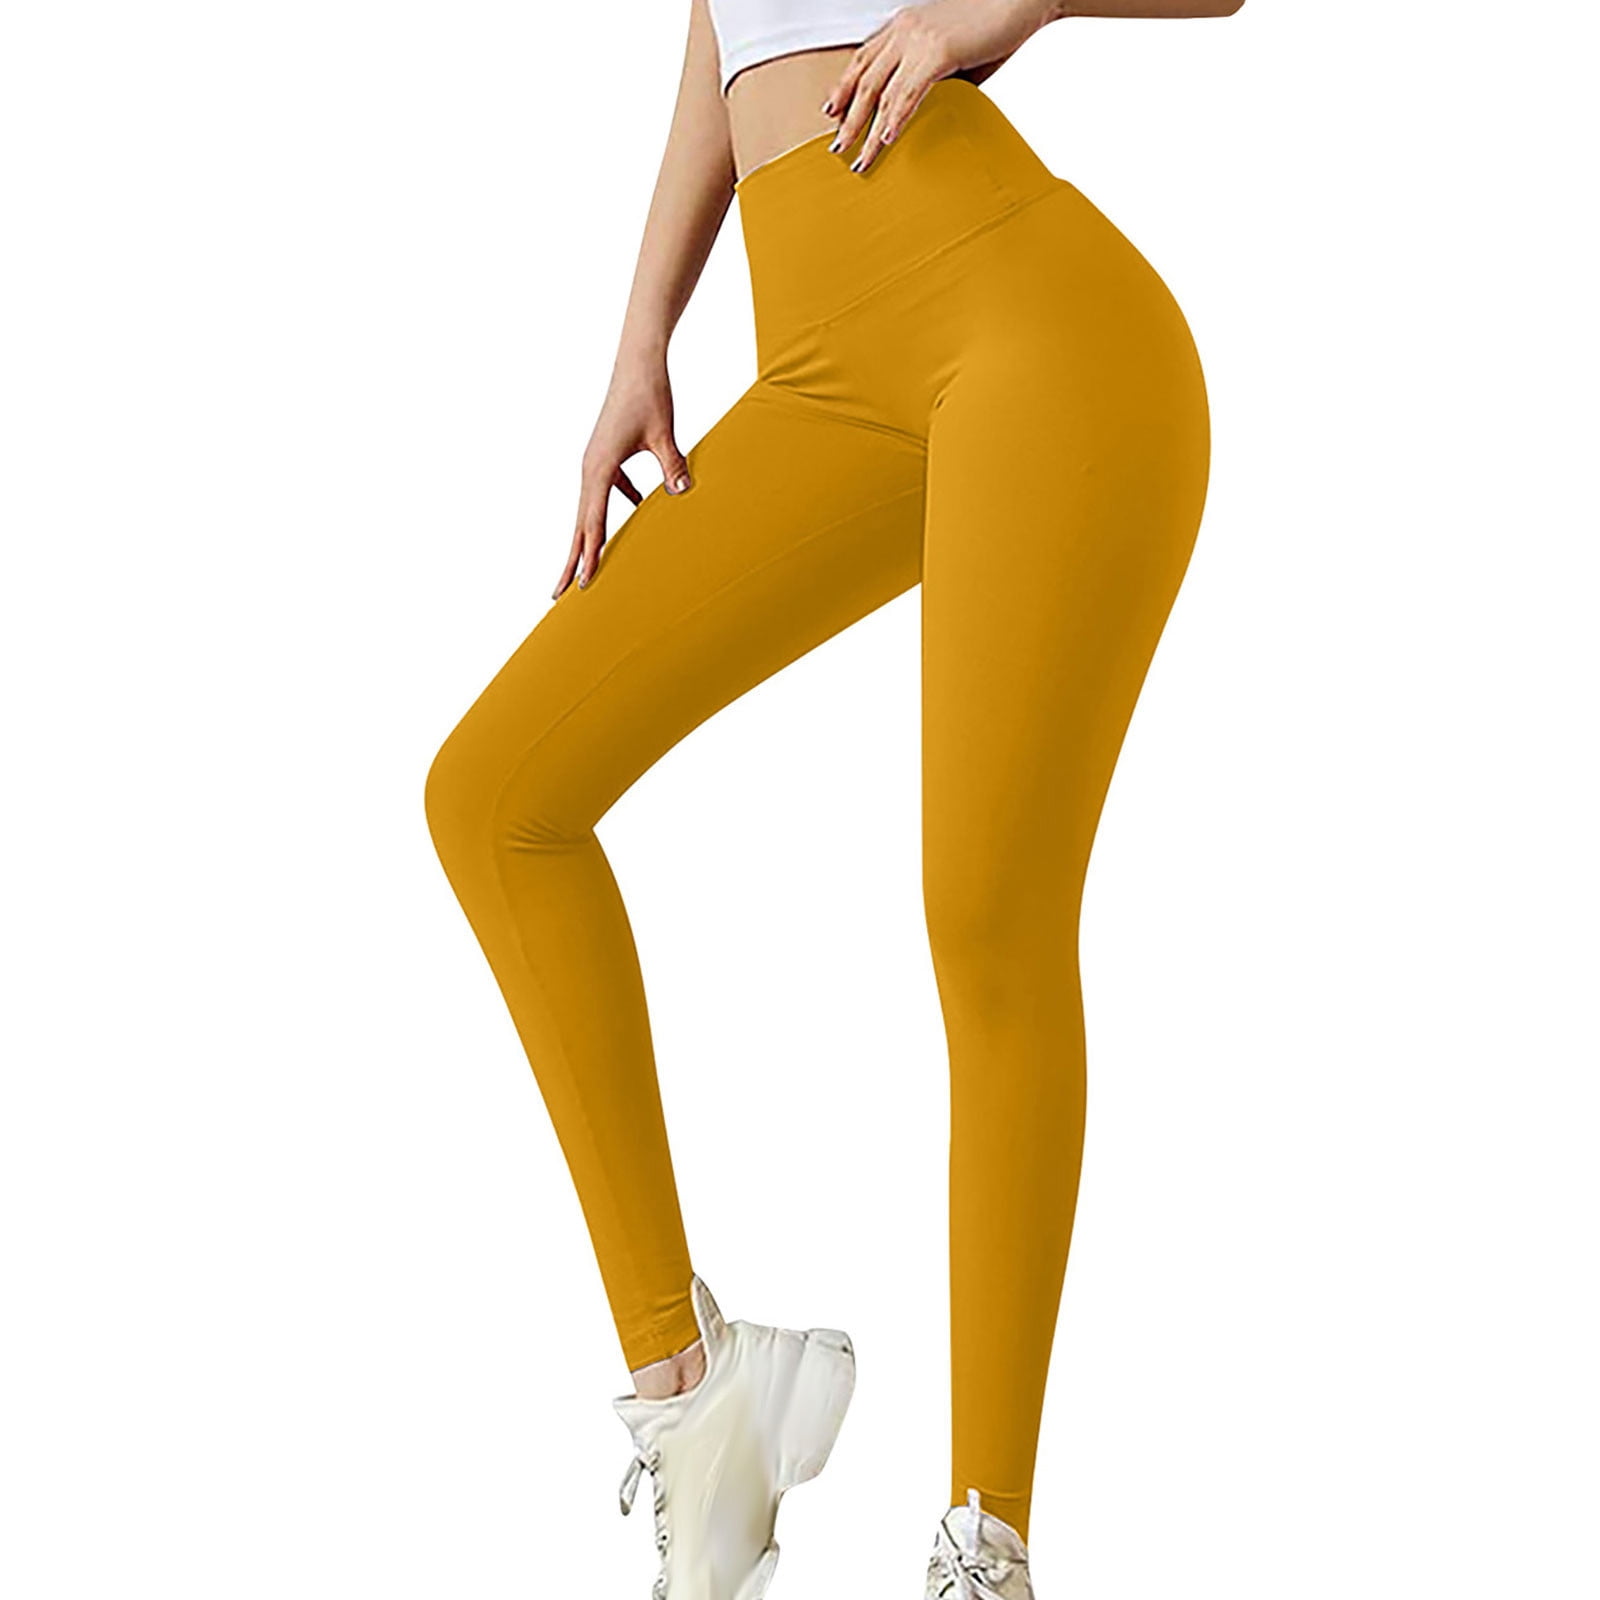 Women's Plus Size High Waist Stretchy Knot Front Solid Leggings Workout Gym  Yoga Pants 4XL(20) 